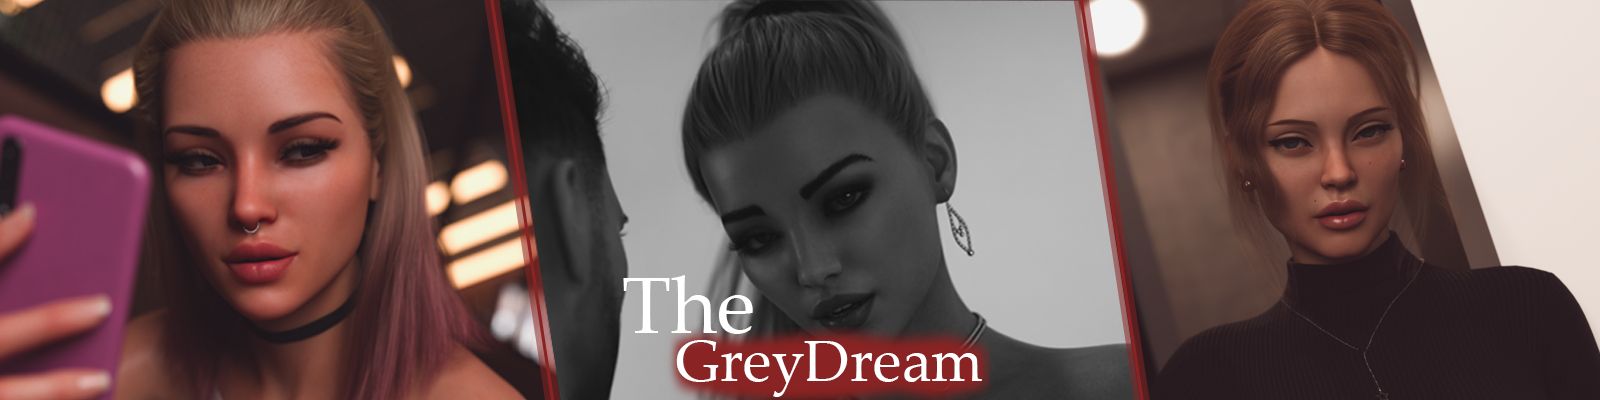 The Grey Dream Apk Android Adult Game Download (10)